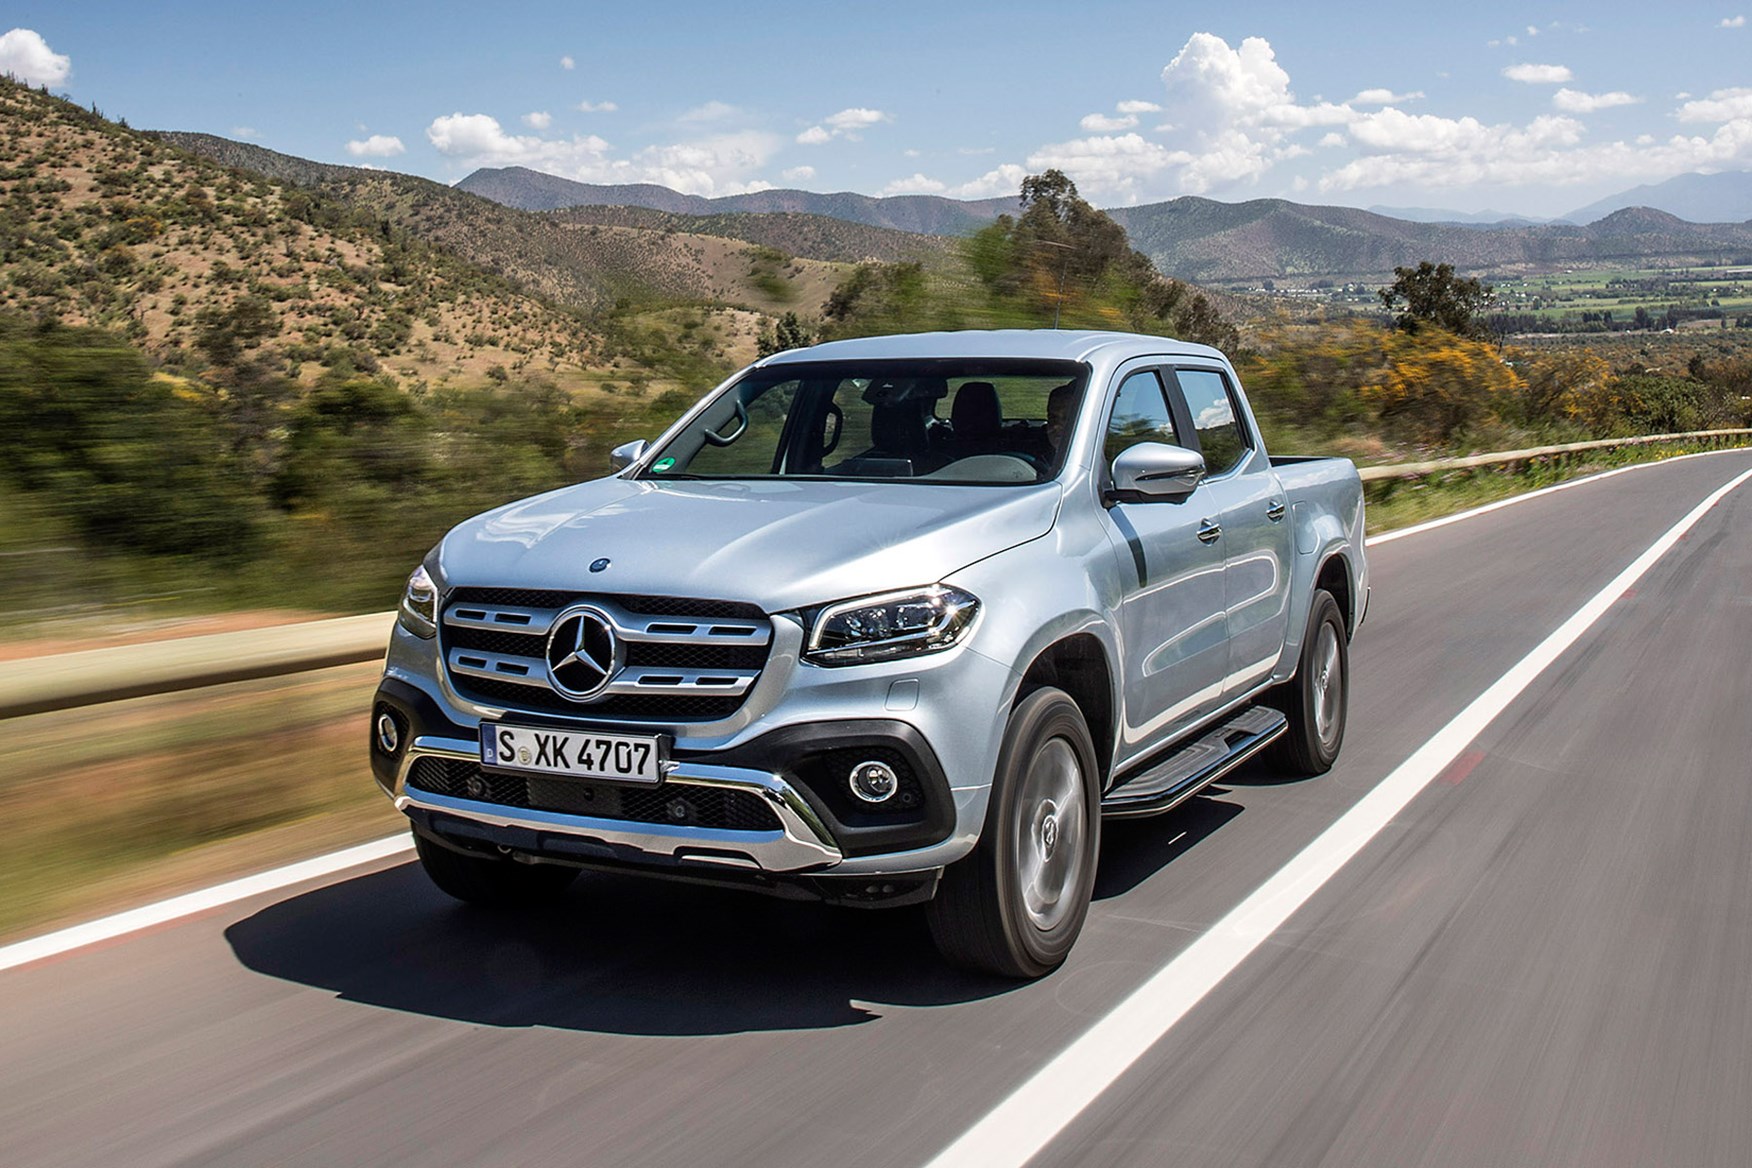 Mercedes-Benz X-Class full review on Parkers Vans - on the road